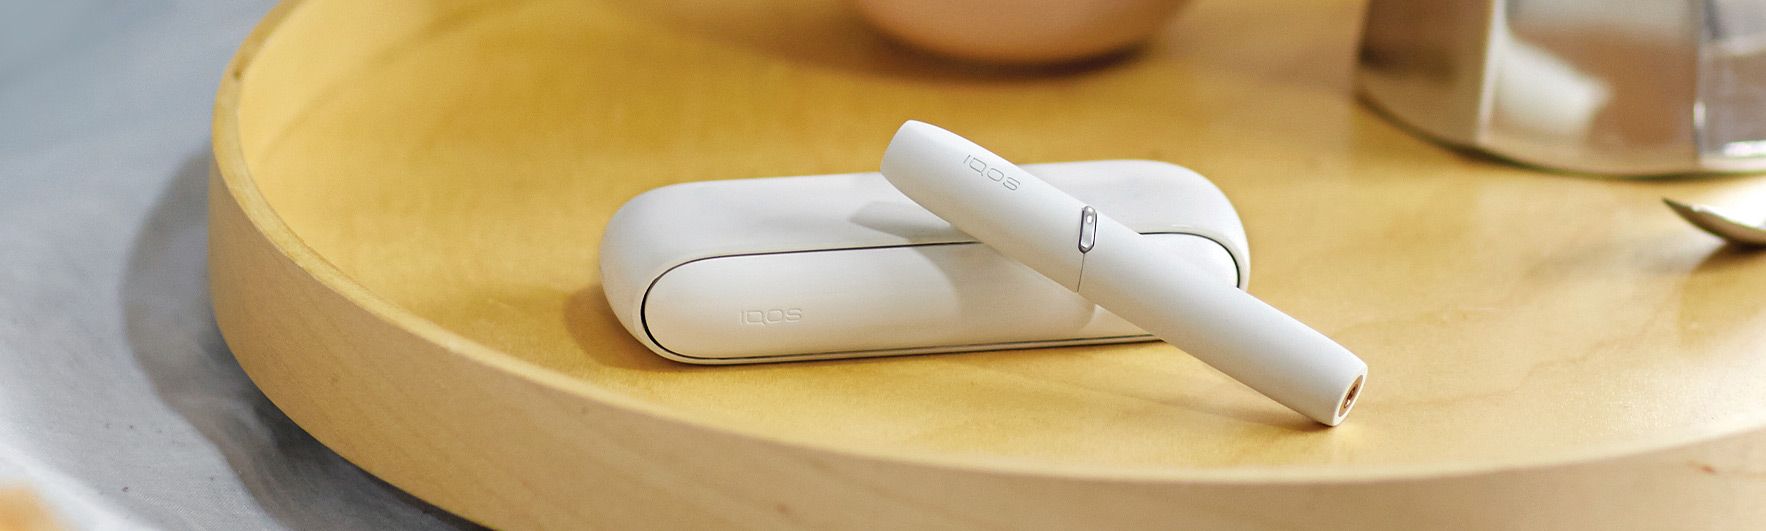 IQOS stores are open again.